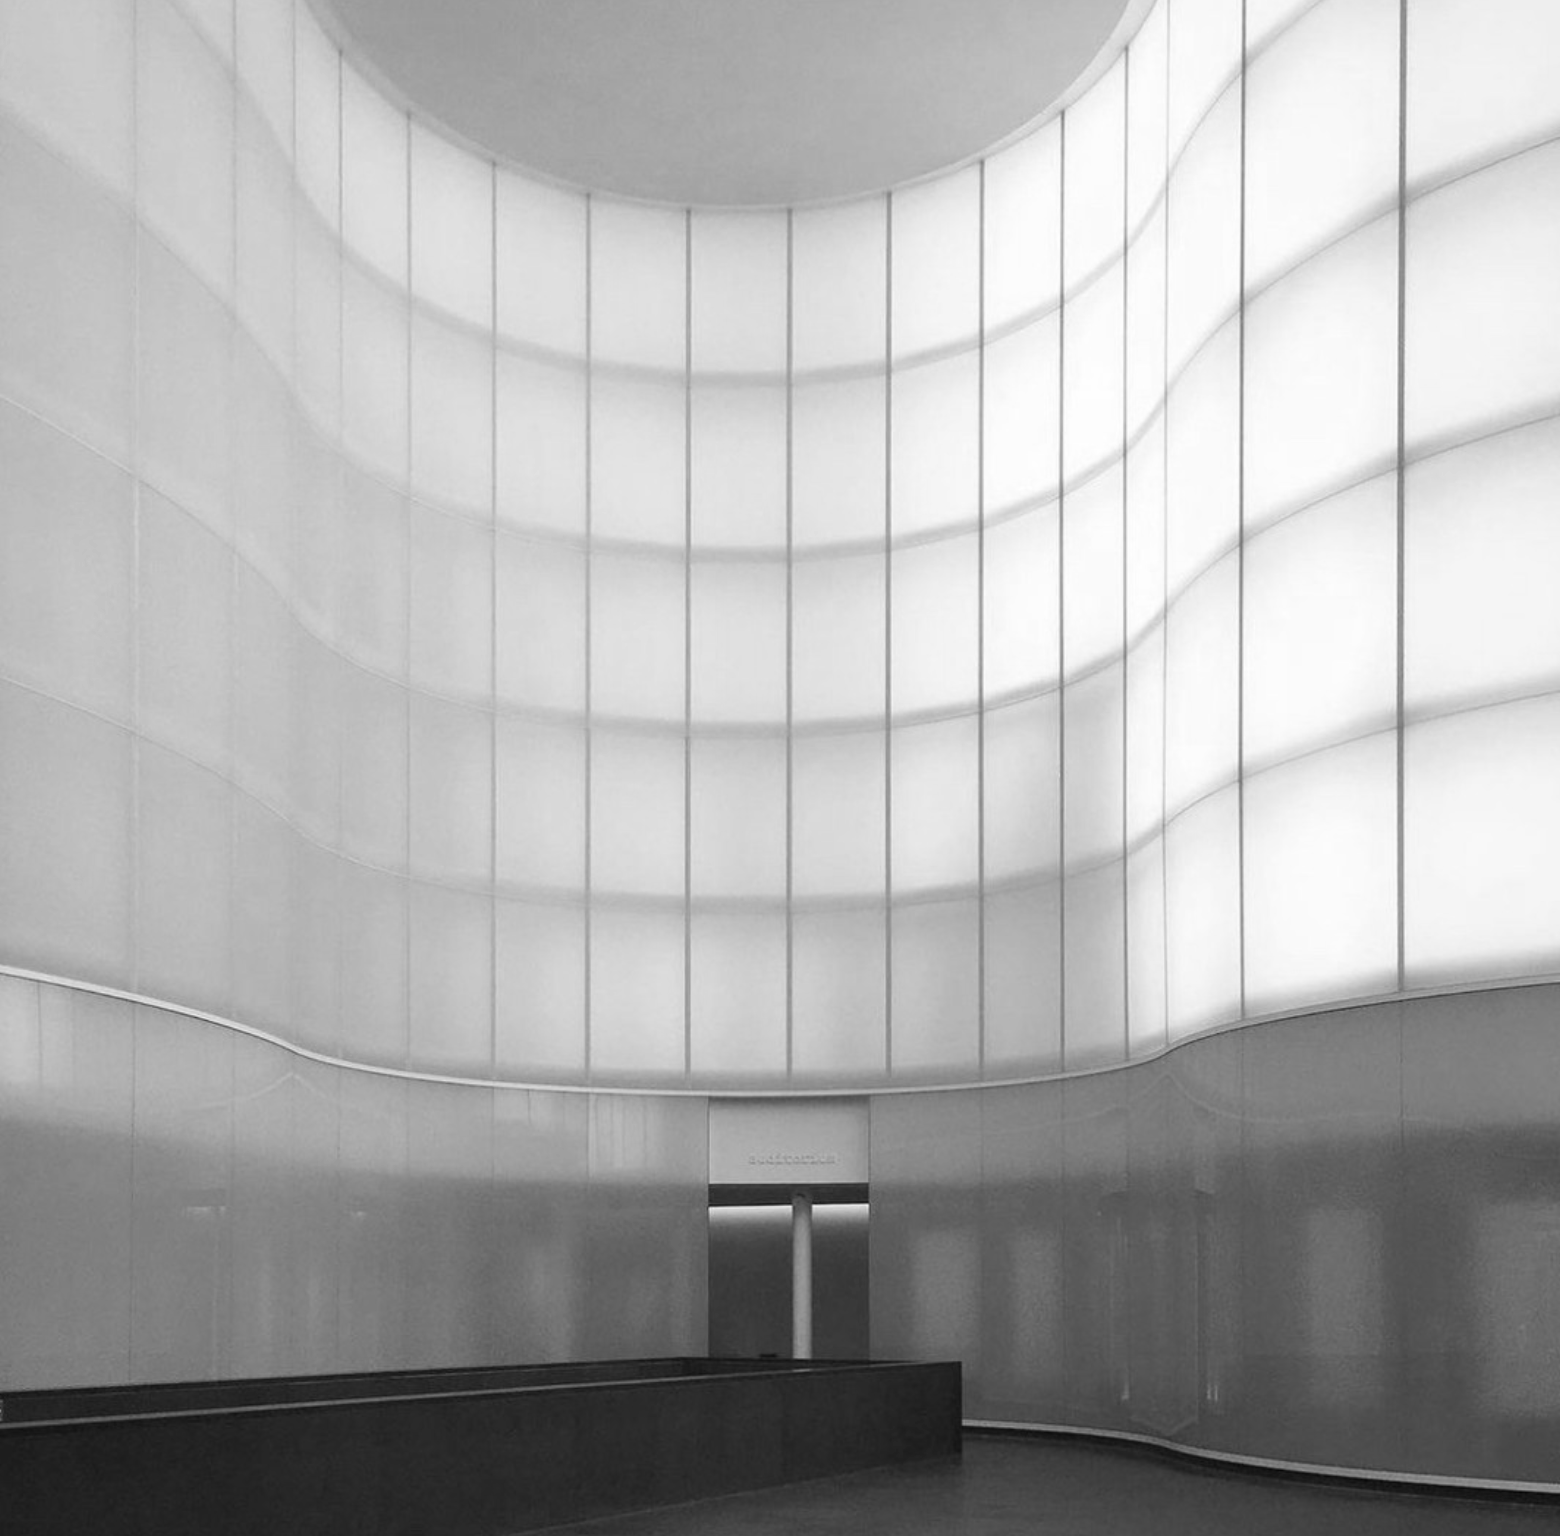 Black and white image of a opaque glass wall in a museum